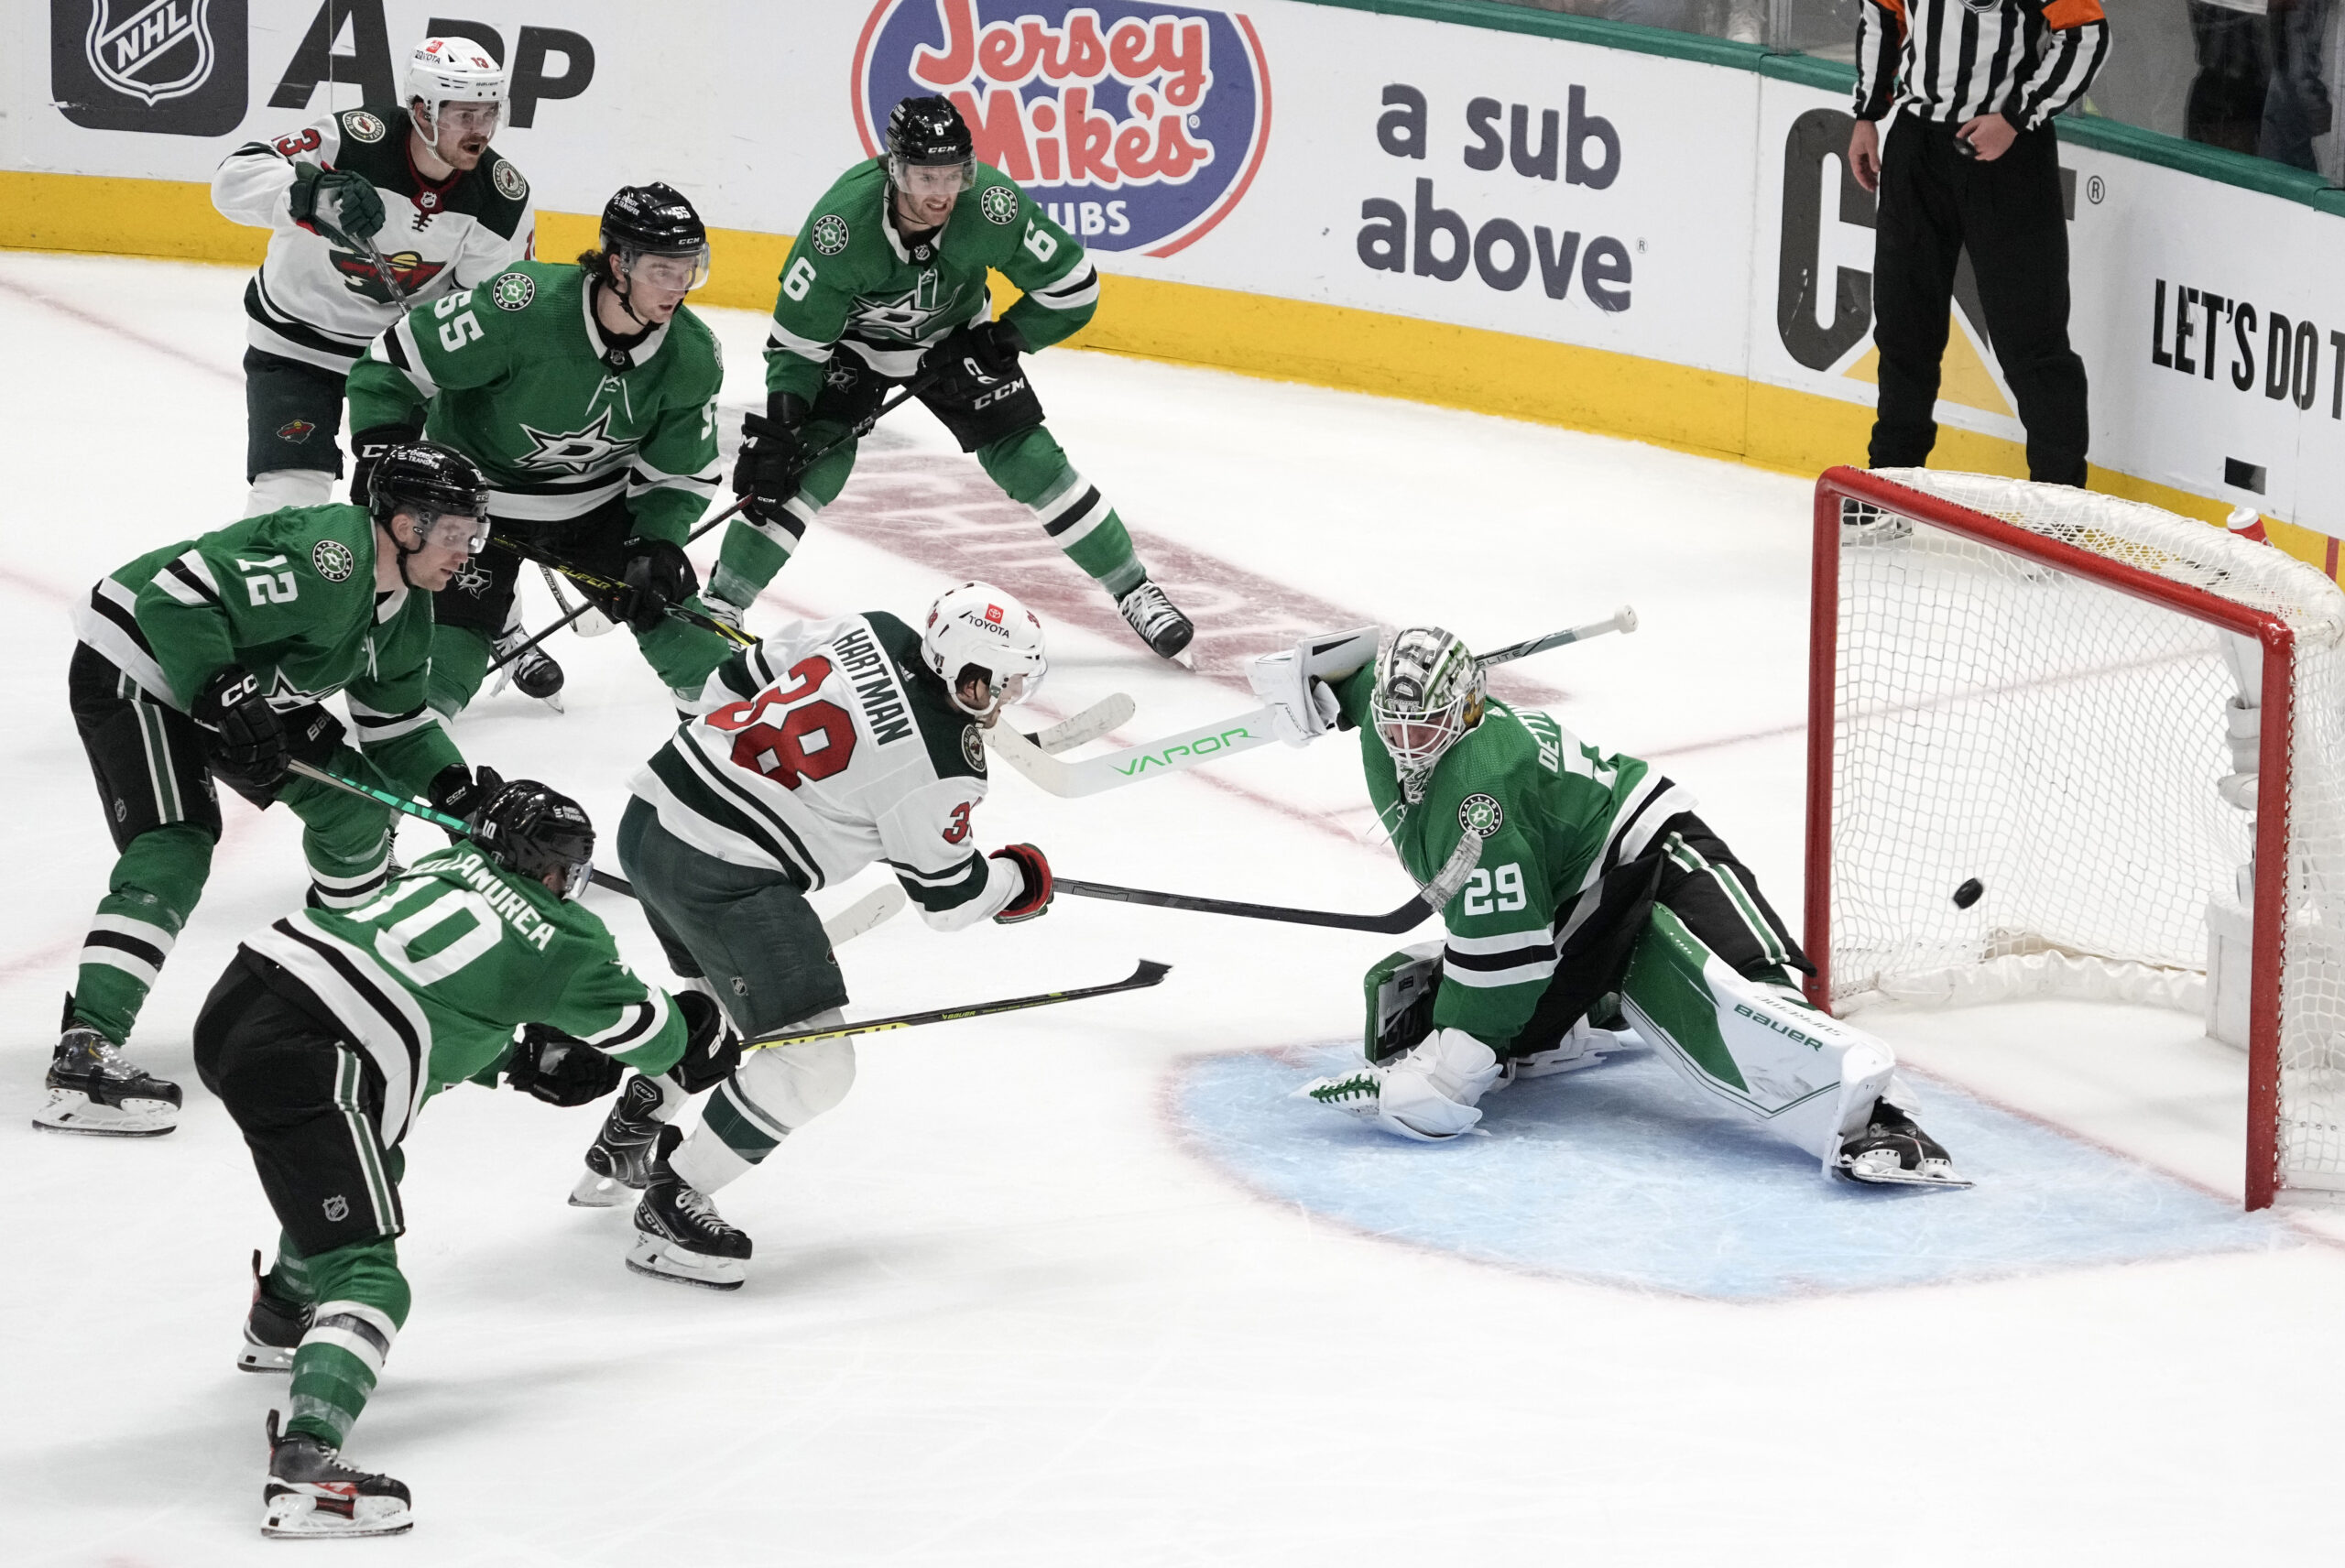 Hartman goal in 2nd OT gives Wild 3-2 win over Stars in playoff